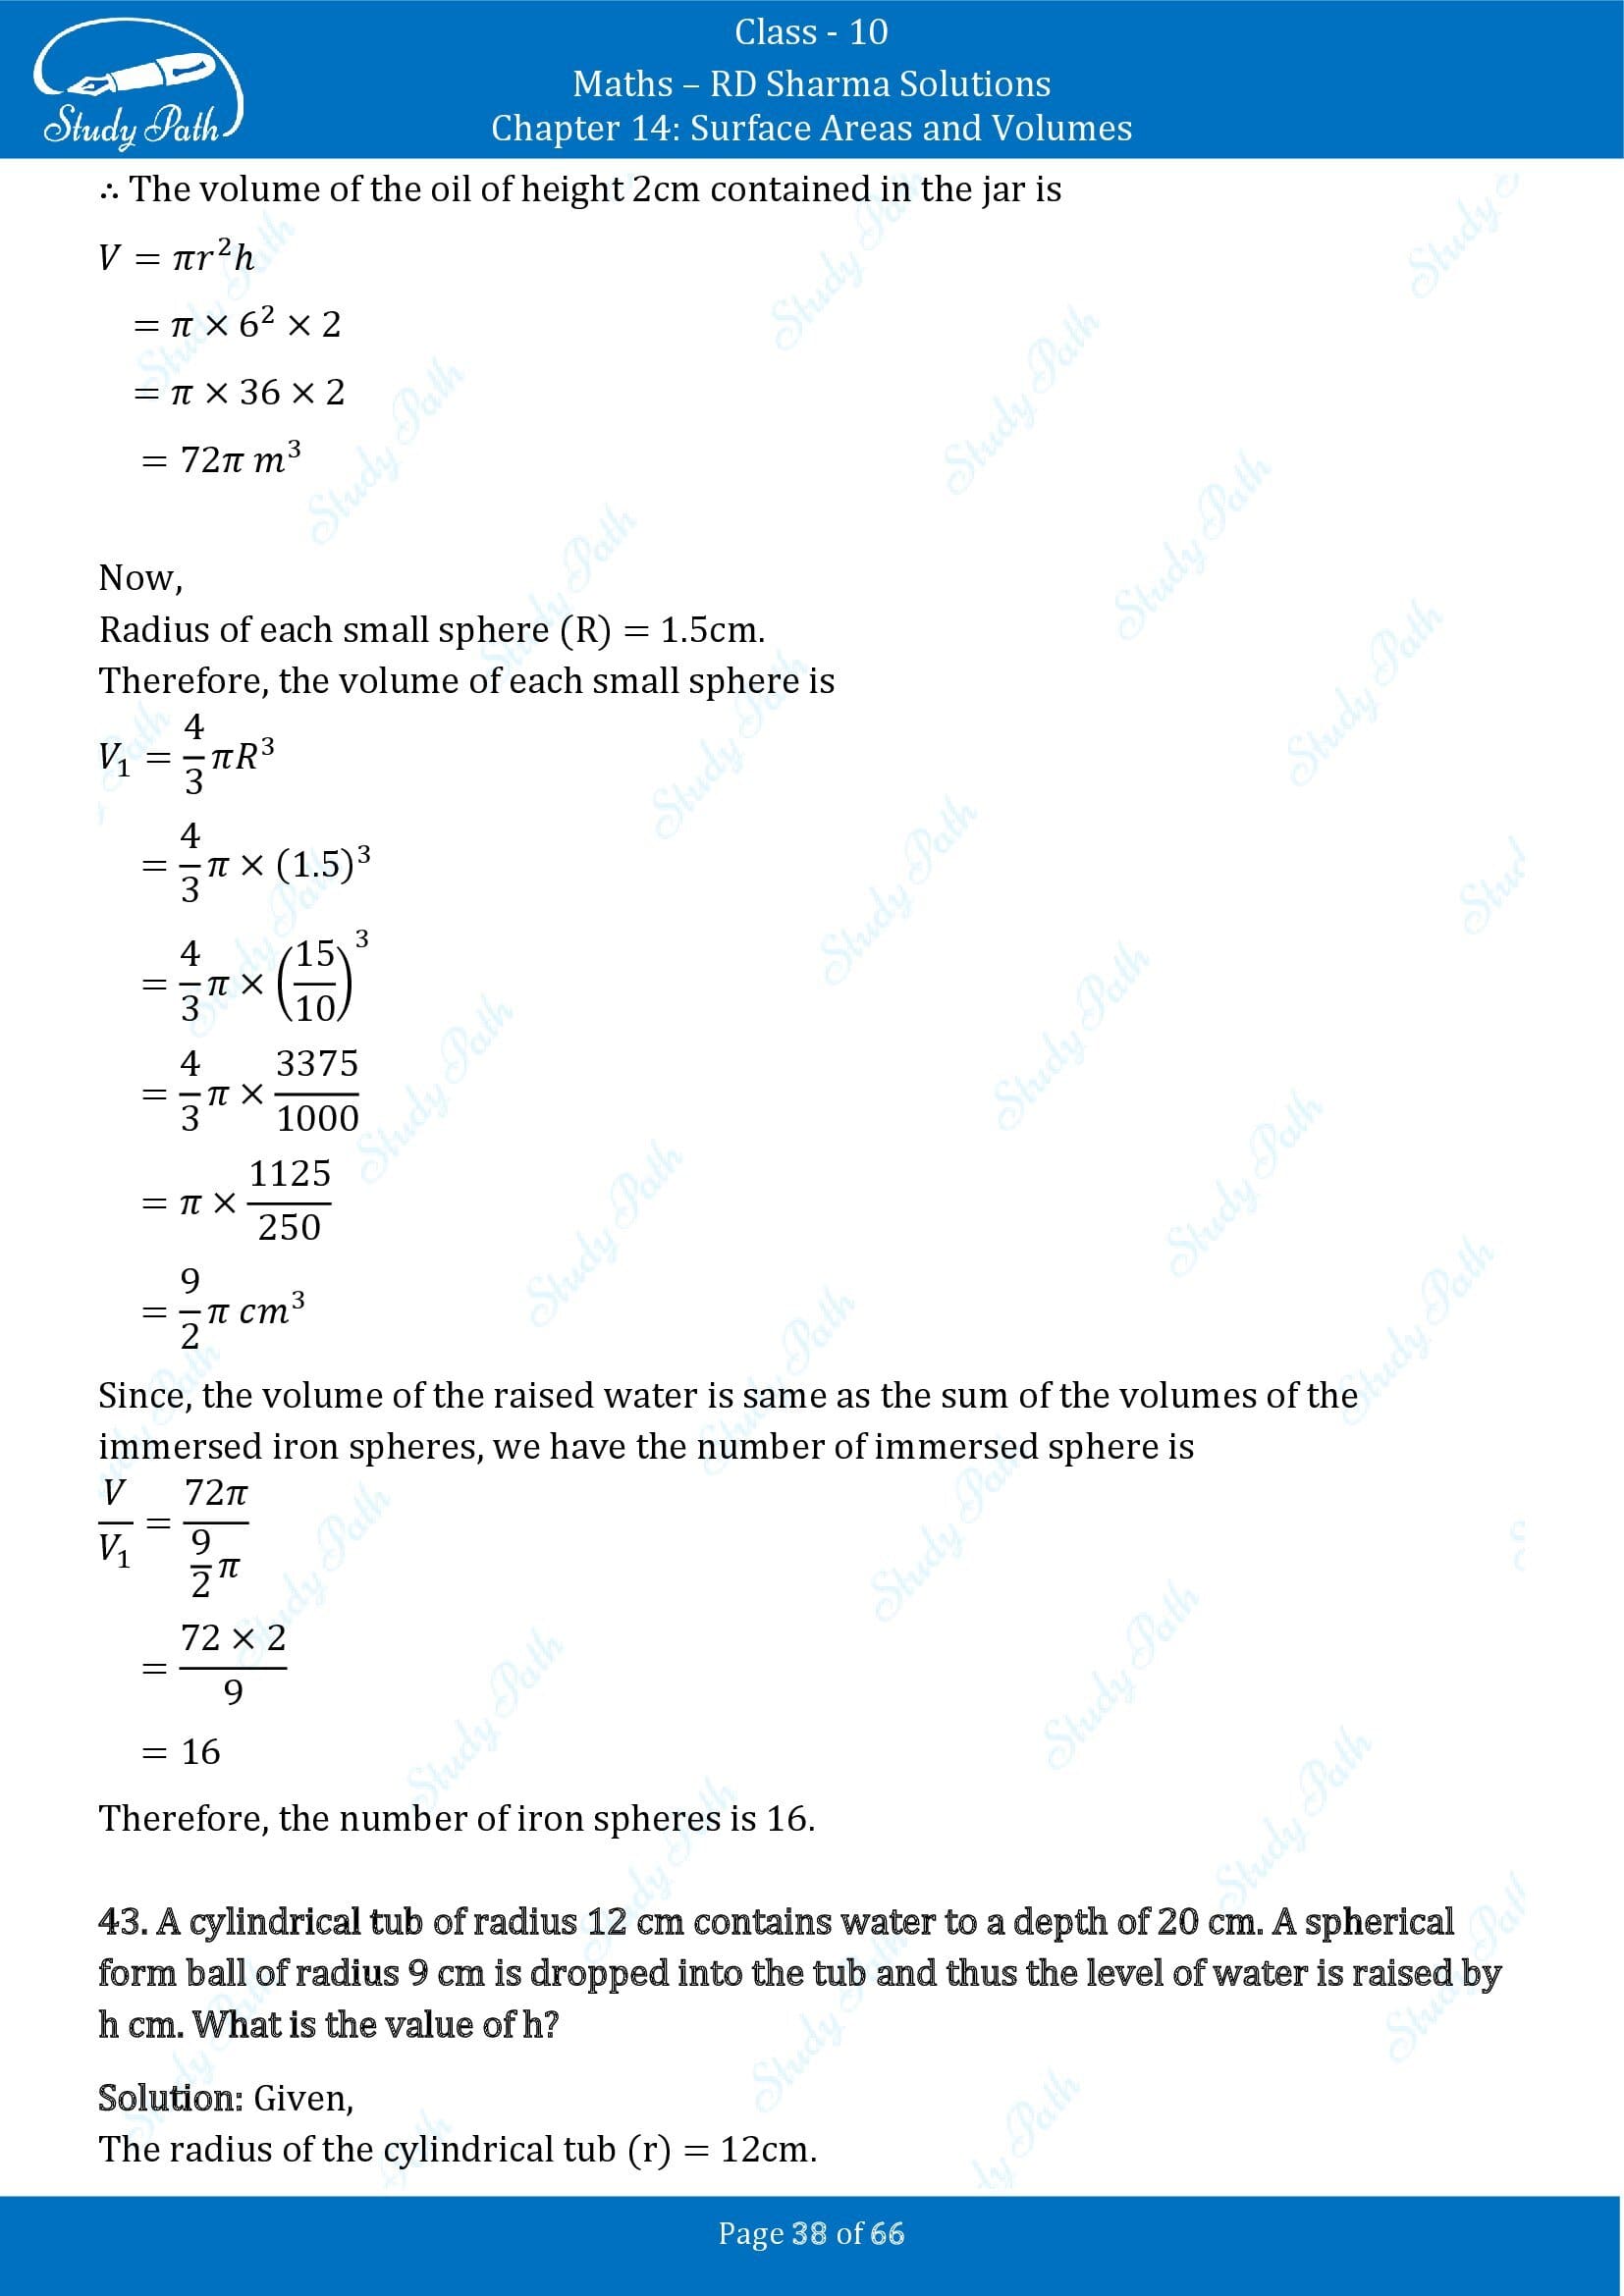 RD Sharma Solutions Class 10 Chapter 14 Surface Areas and Volumes Exercise 14.1 00038